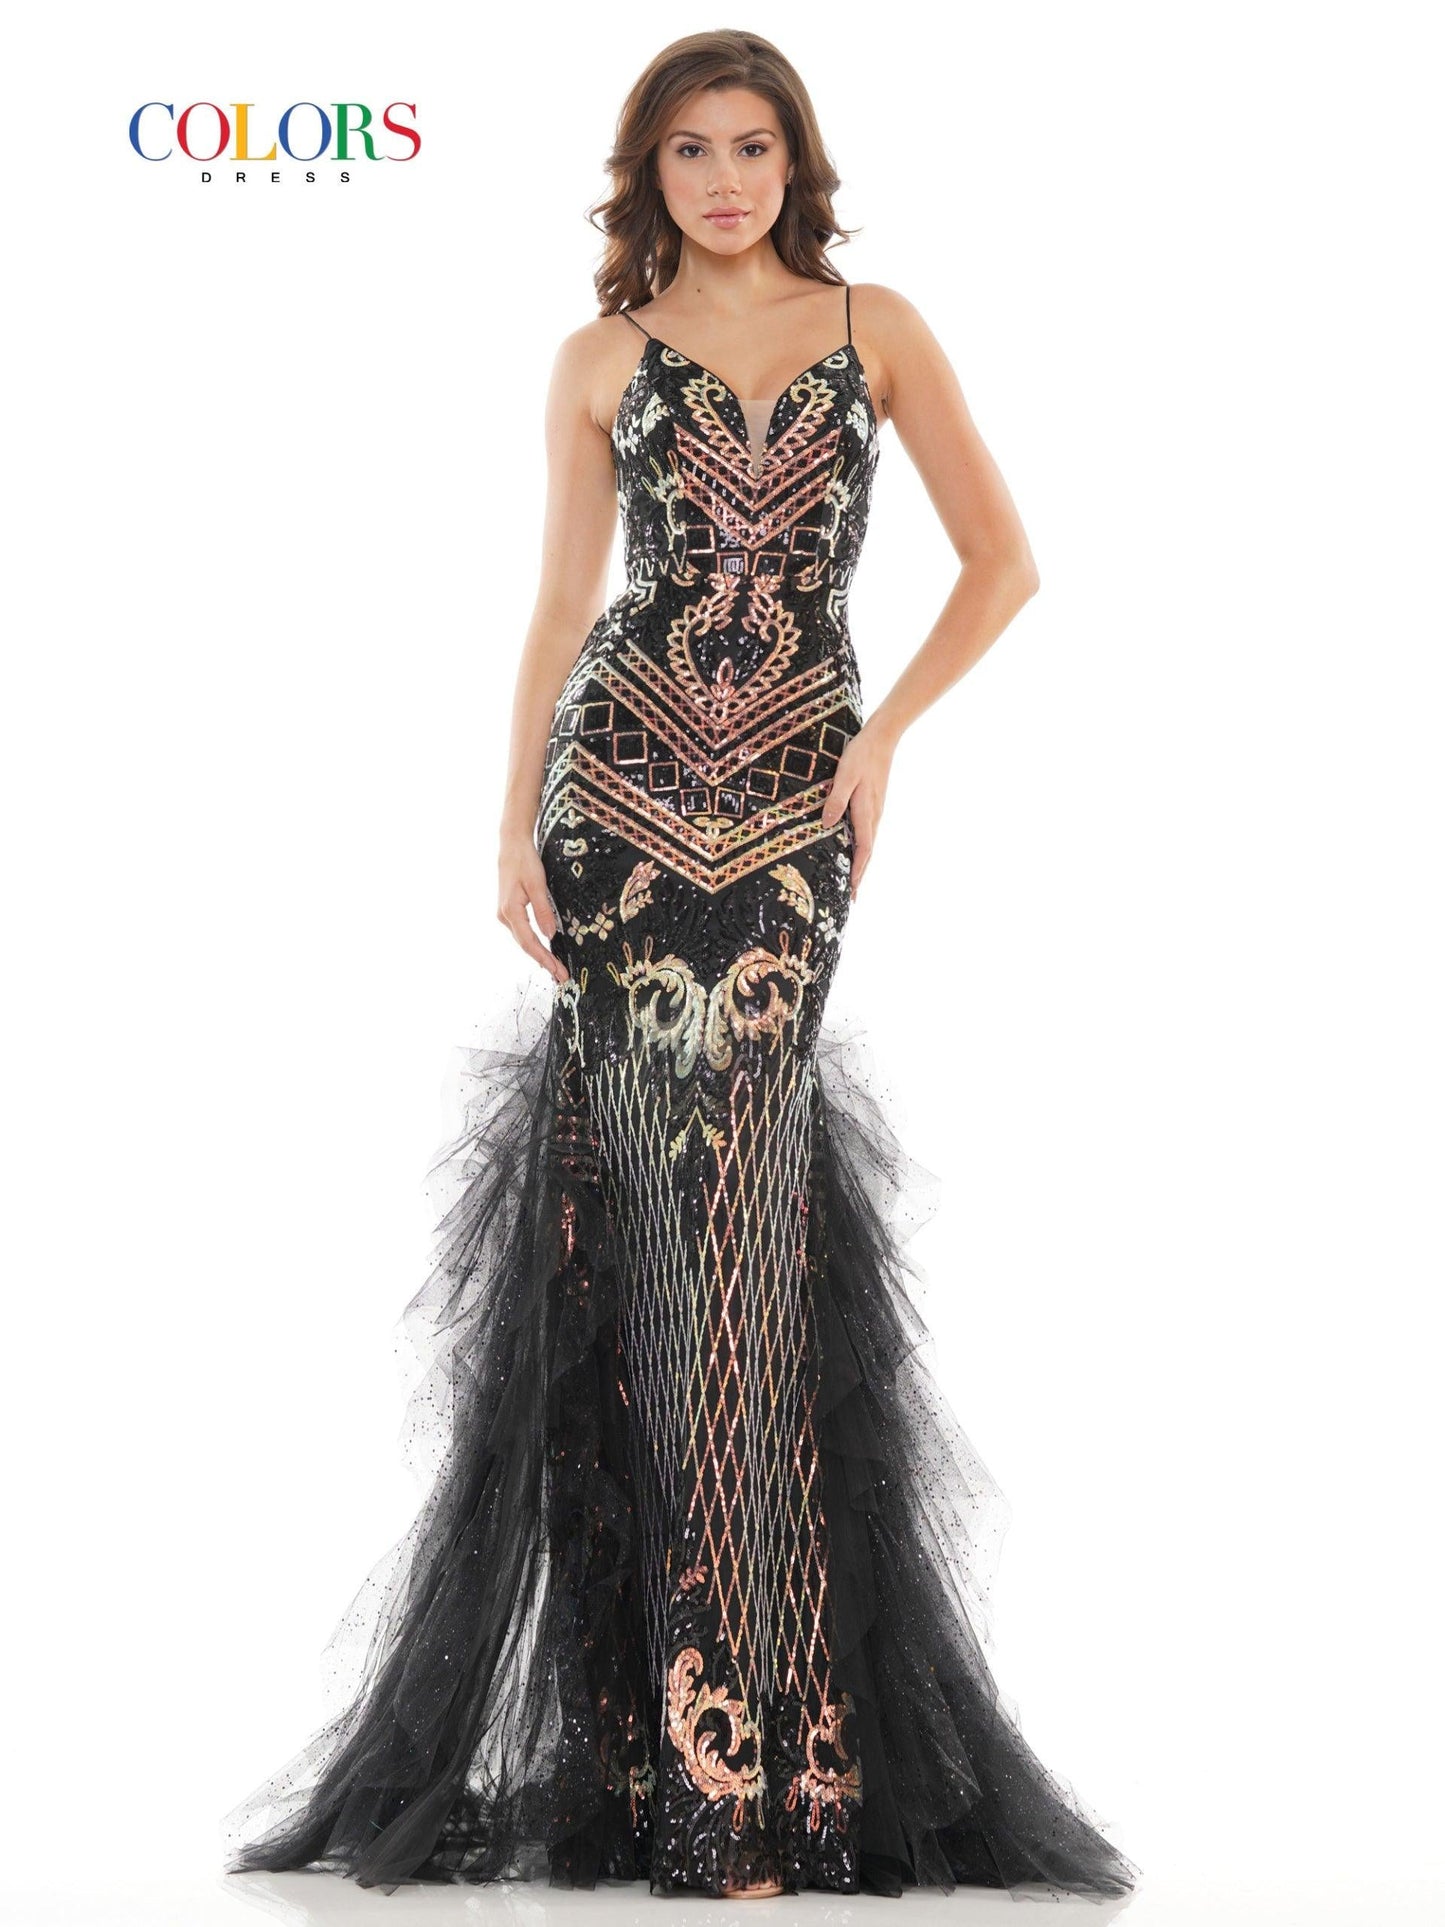 Colors Prom Long Formal Glitter Mesh Dress 2738 - The Dress Outlet